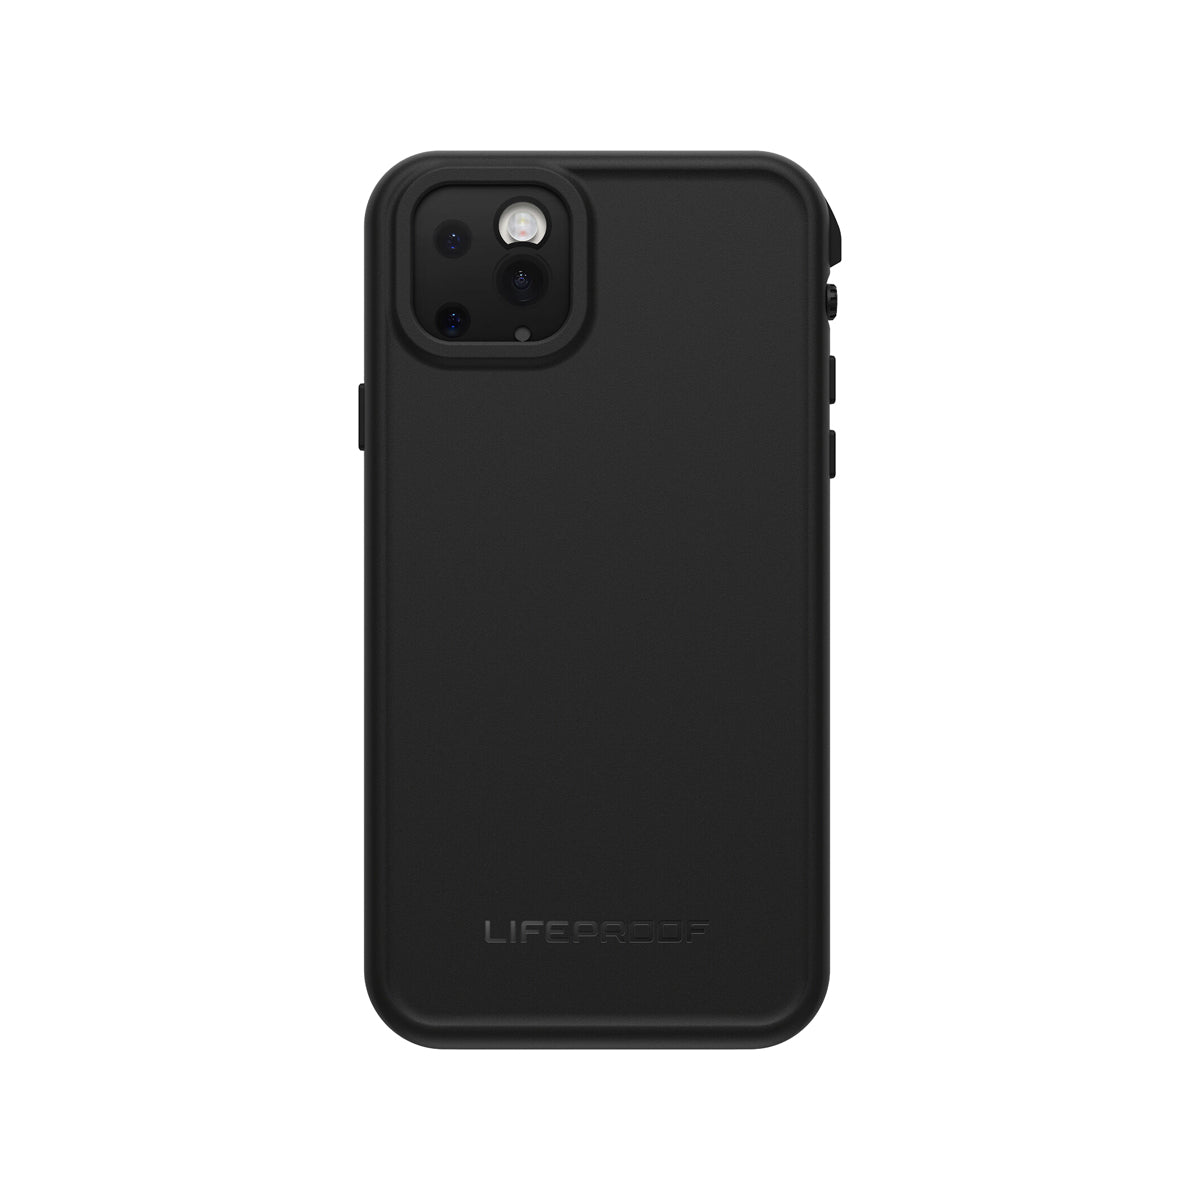 Lifeproof Fre Phone Case for iPhone 11 Pro Max - Black.